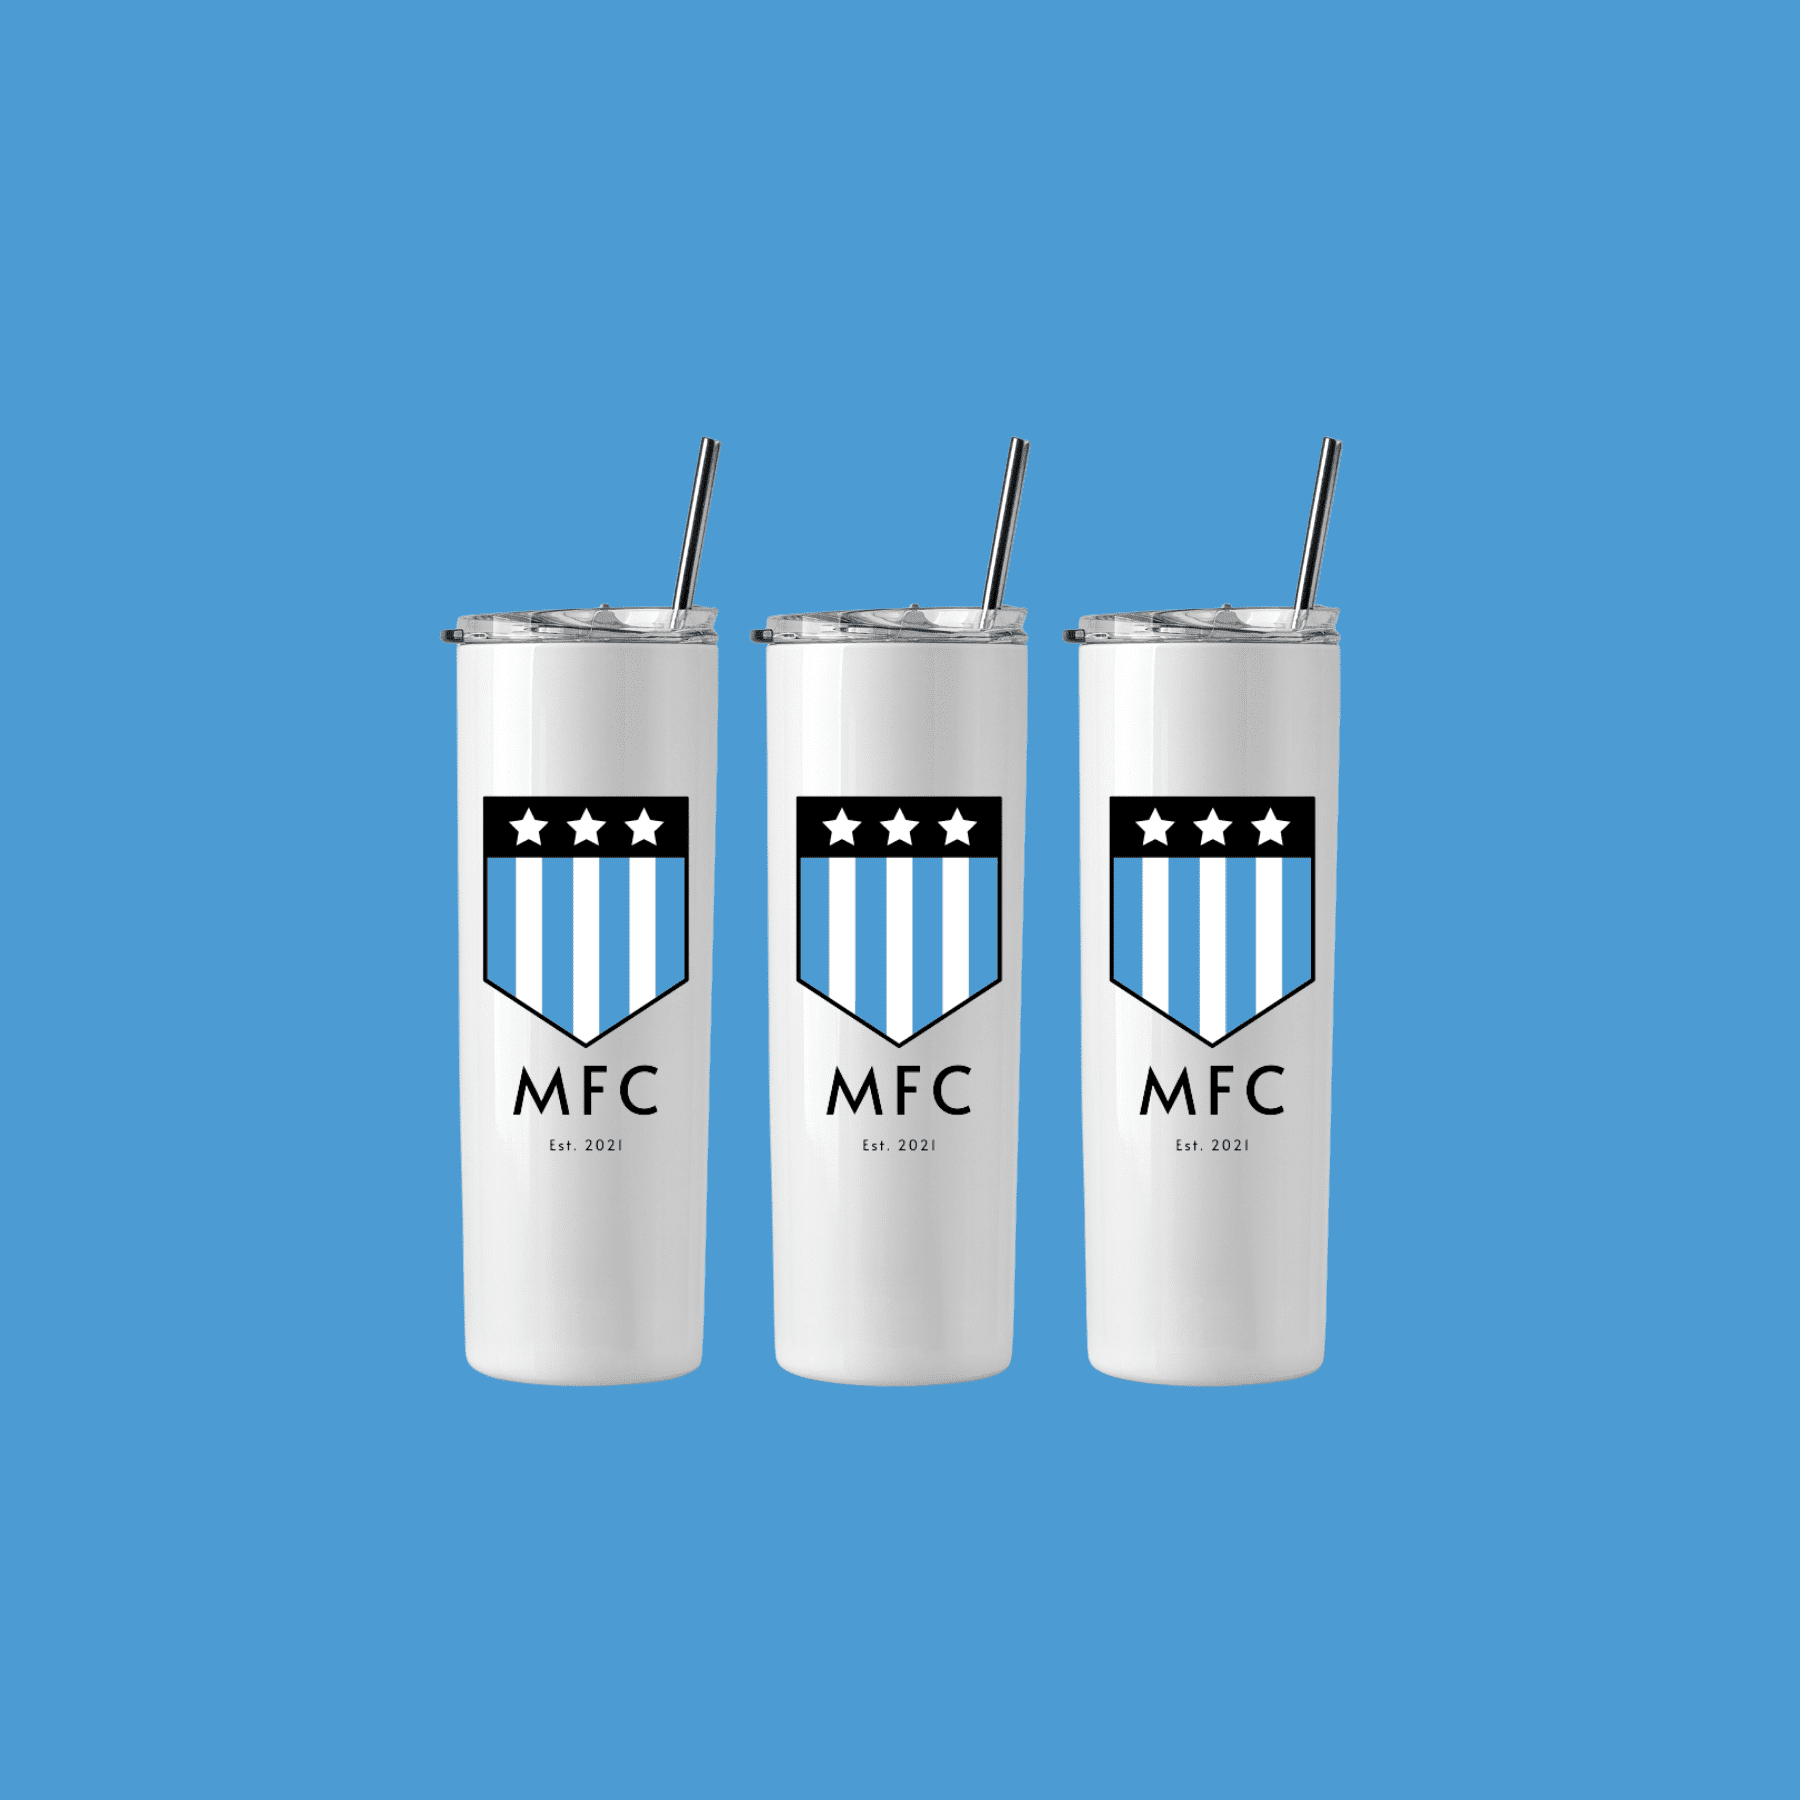 Image shows a shite skinny tumbler with MFC's logo